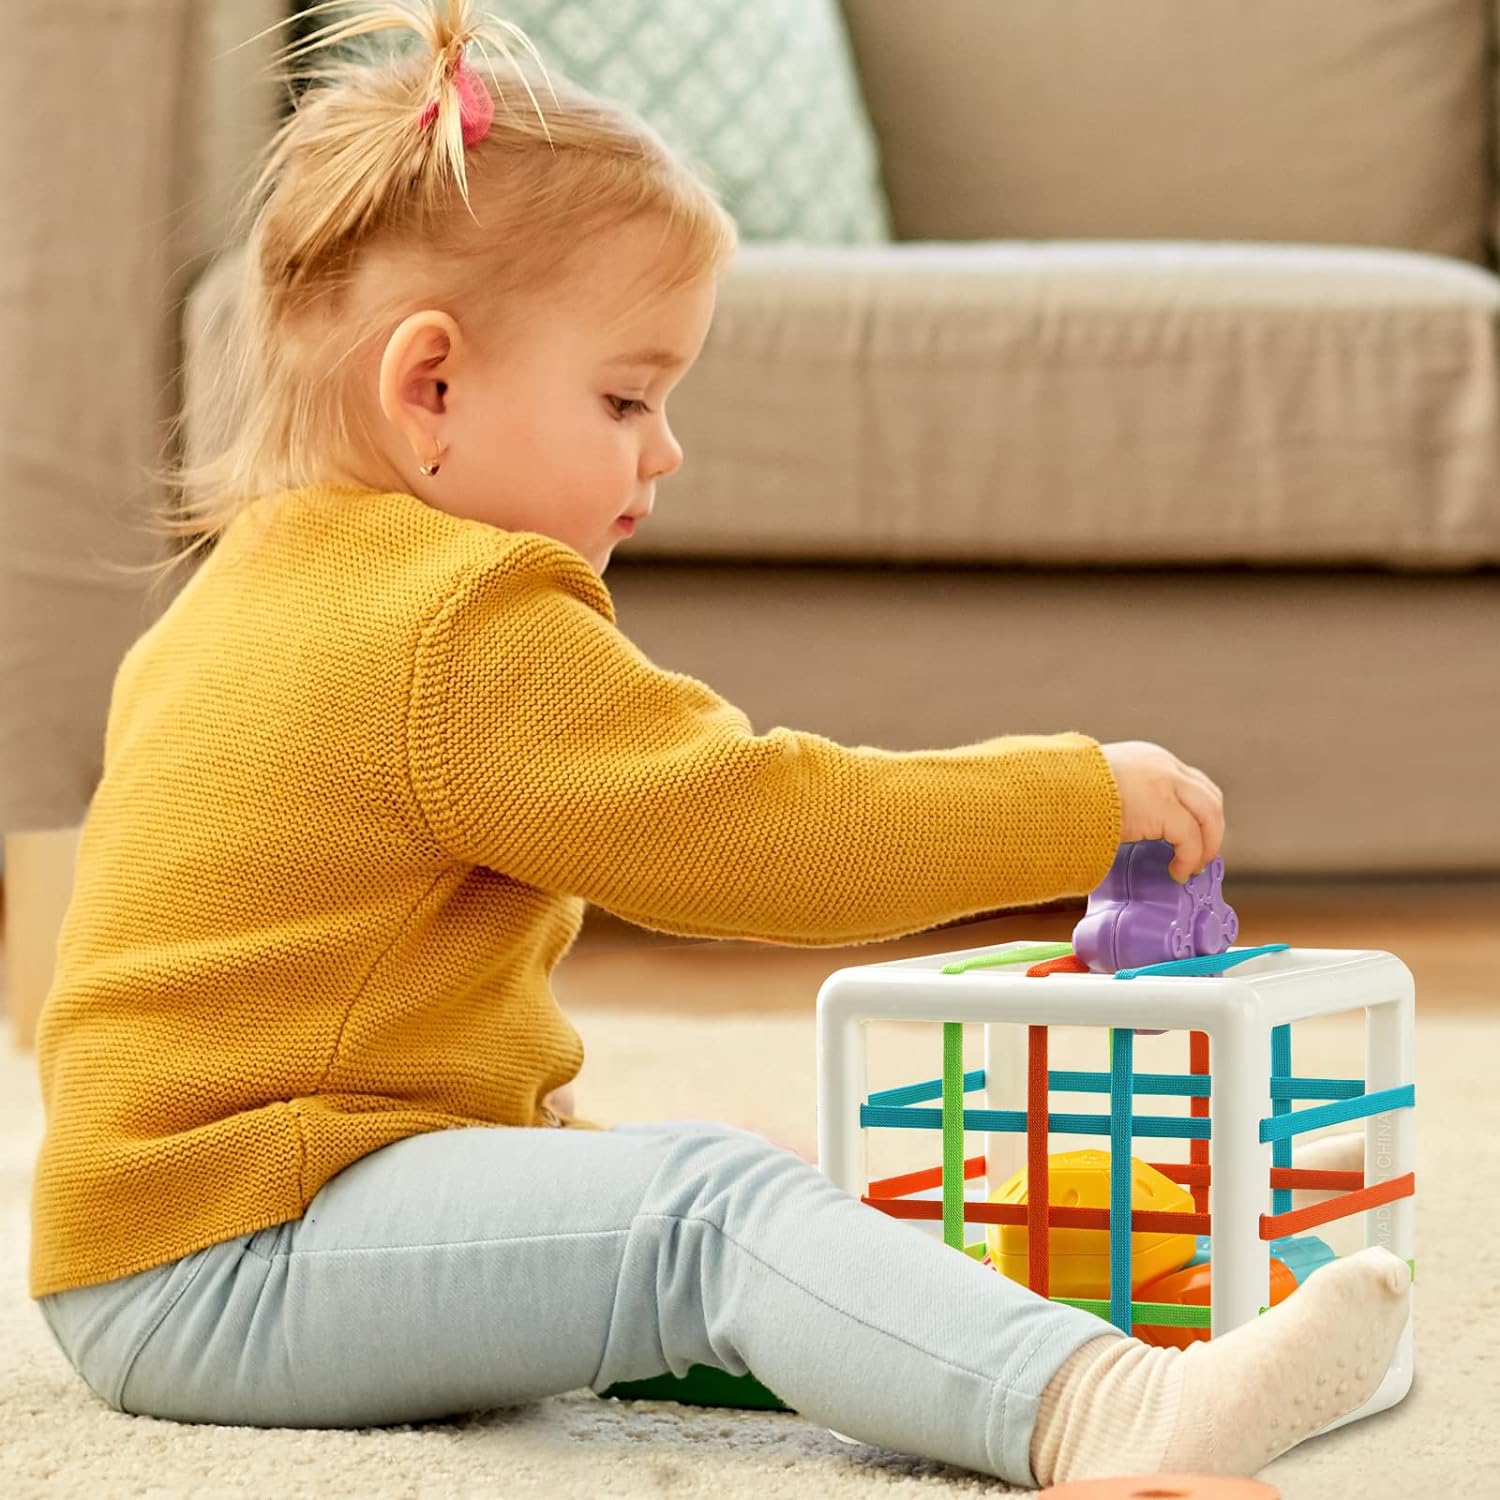 Aprilwolf Montessori Toys for 1 Year Old, Cube Bin & 6 Sensory Shape Blocks, Baby Toys 12-18 Months, Developmental Infant Birthday Gifts for Learning Toddler Age 1 2 3